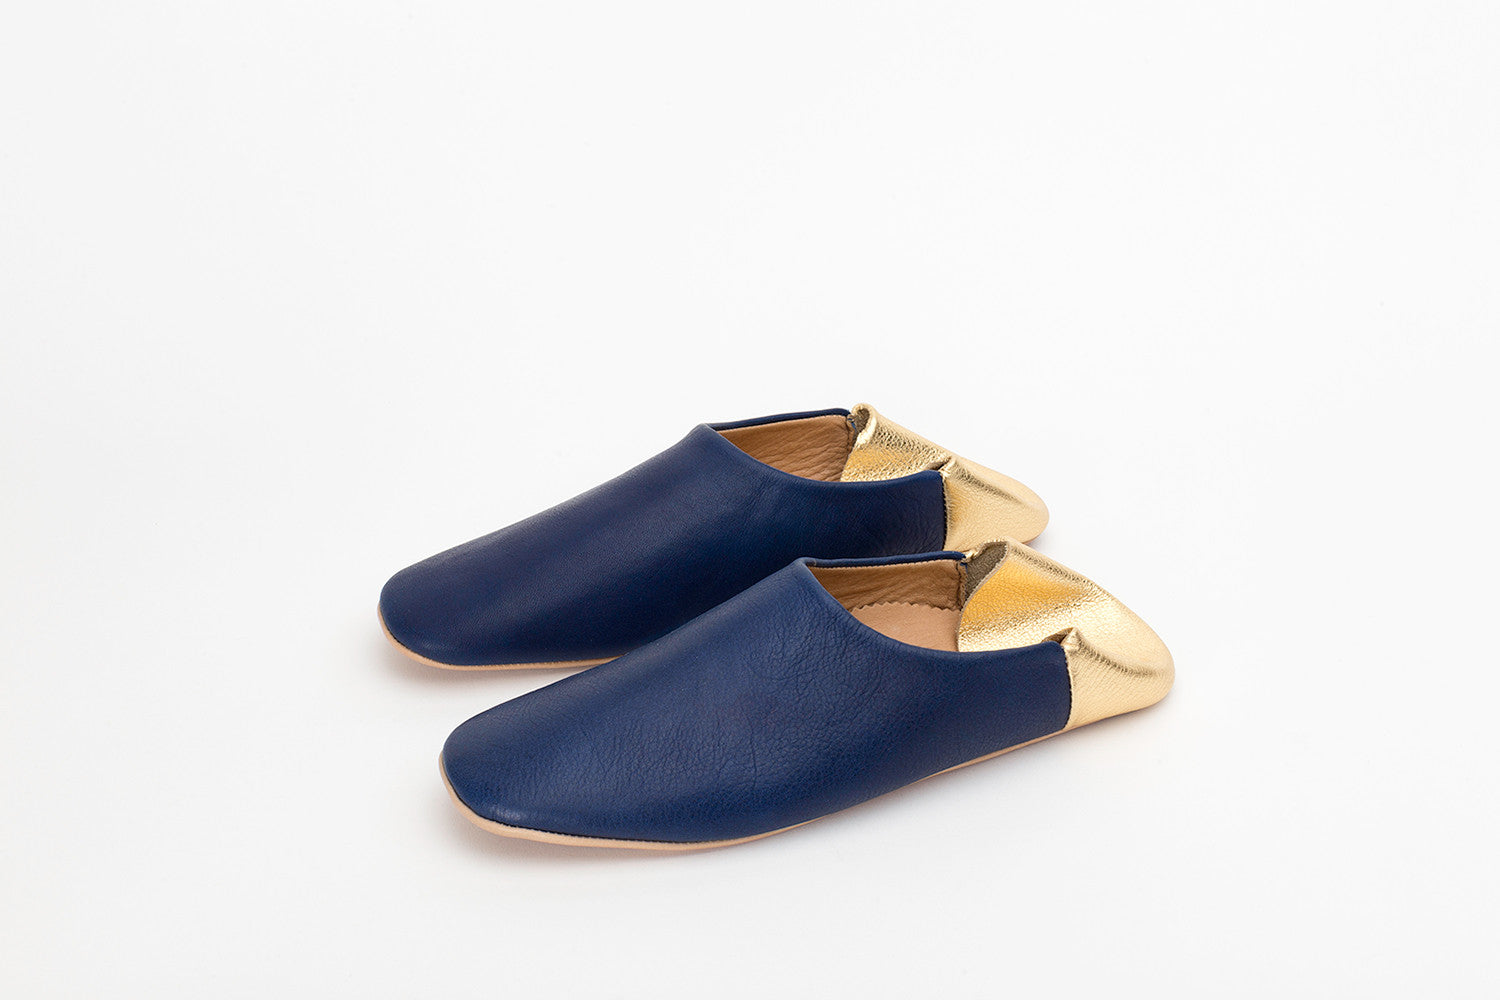 Pair of Cute Women's Leather Slippers / House Shoes | Blue